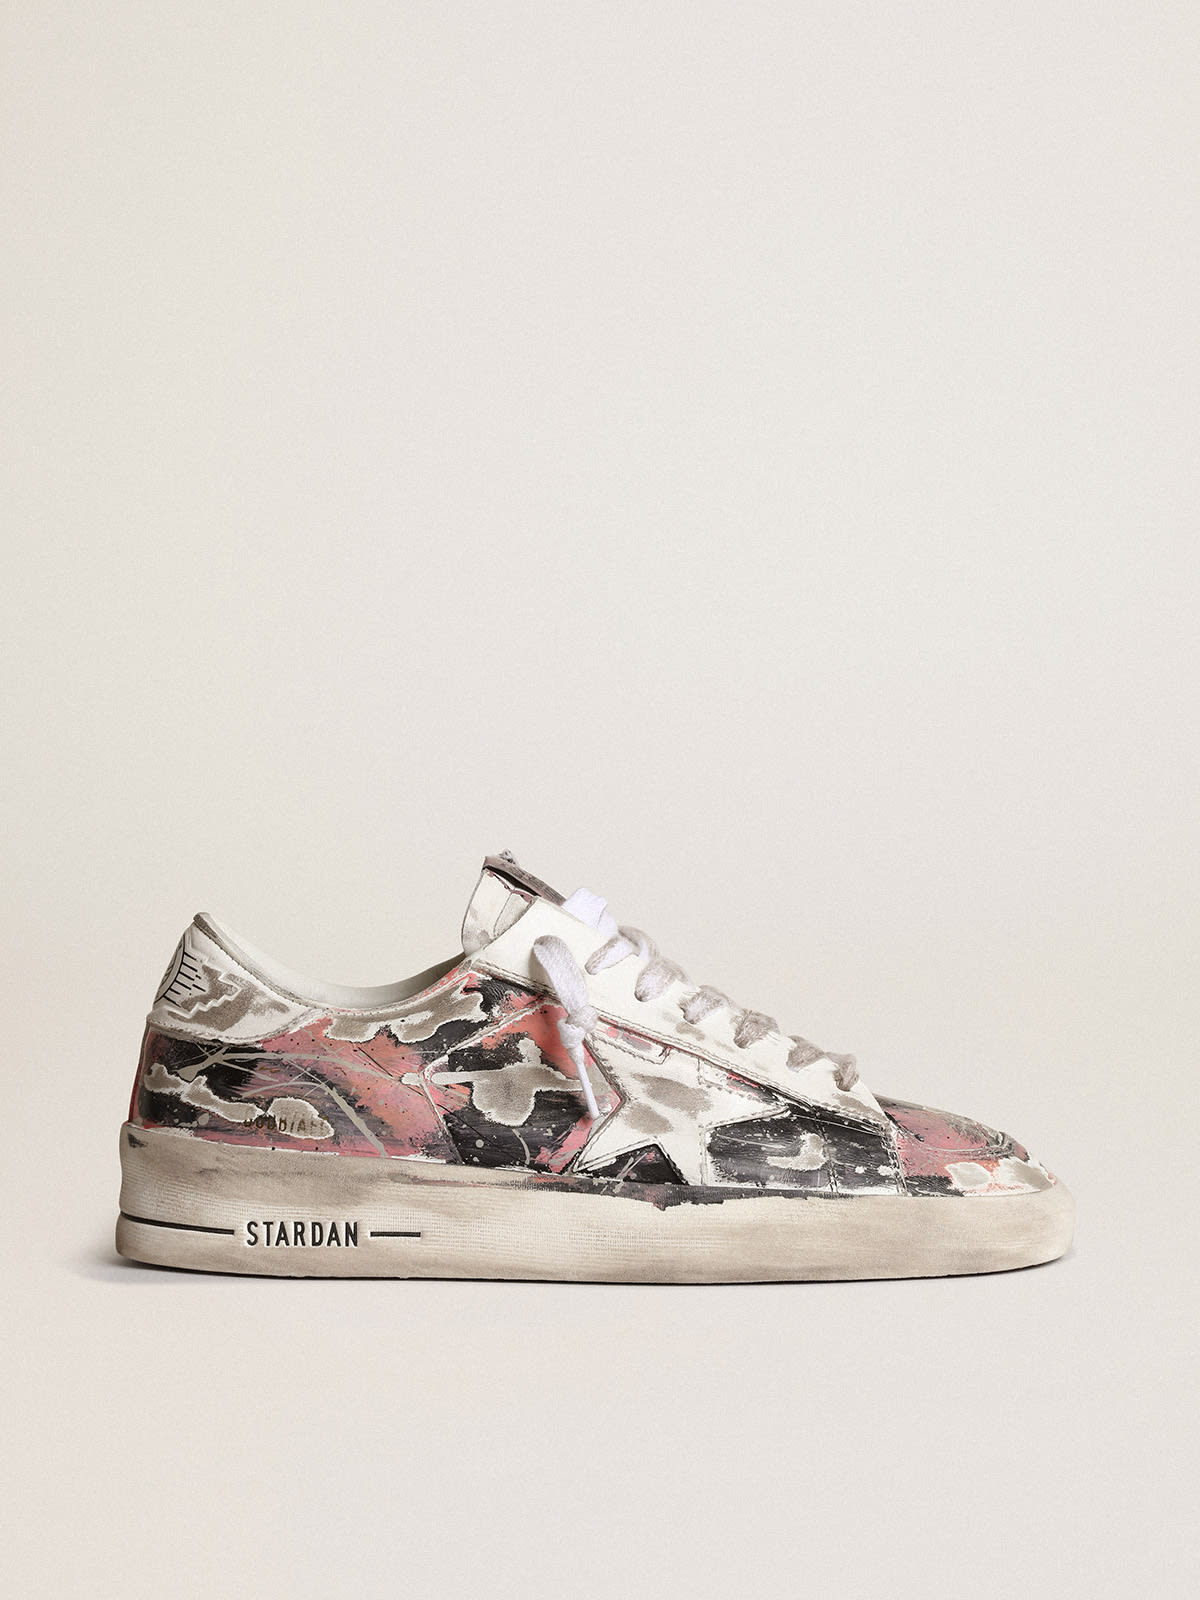 Golden Goose - Women’s Stardan LAB in leather with all-over paint splatters in 